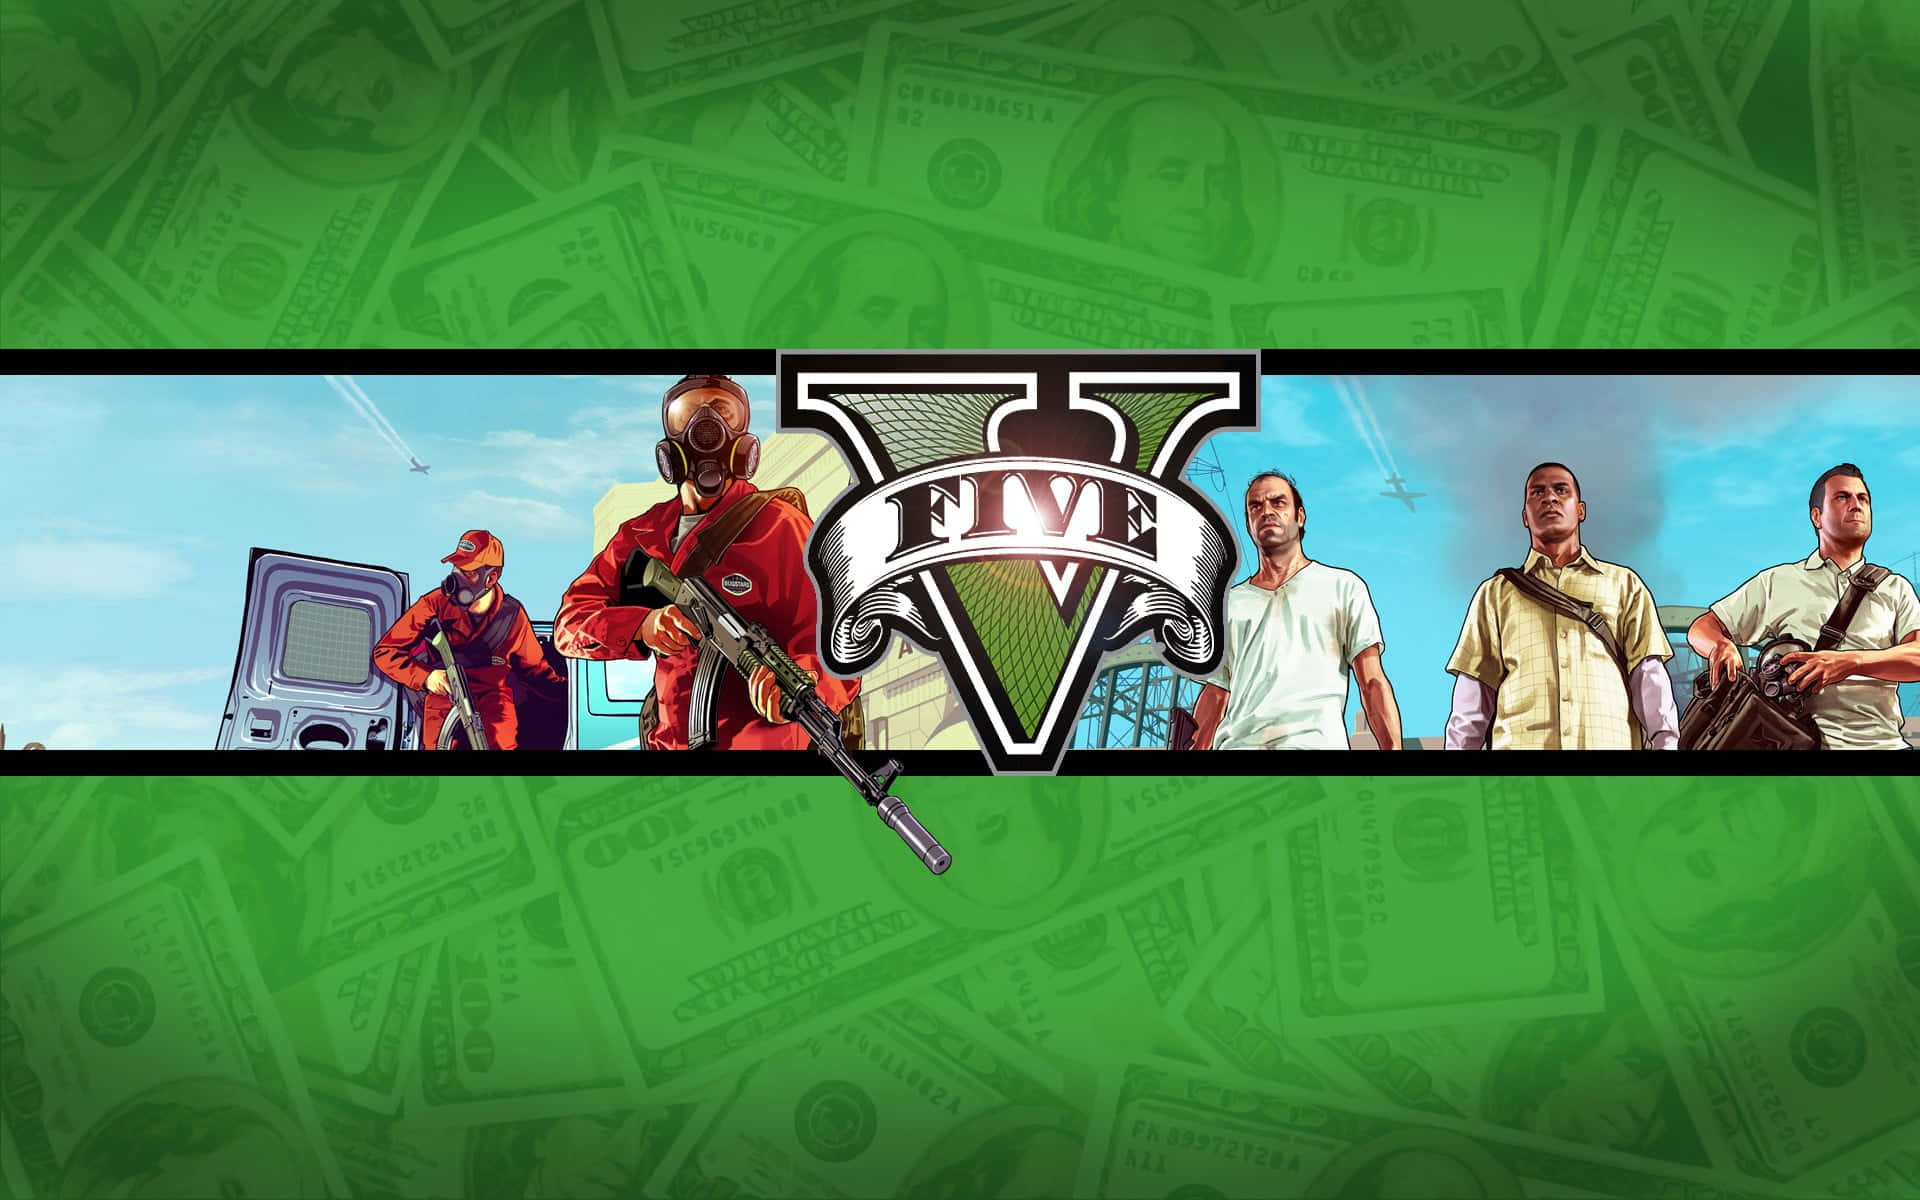 Fast, furious, and fun - Grand Theft Auto V